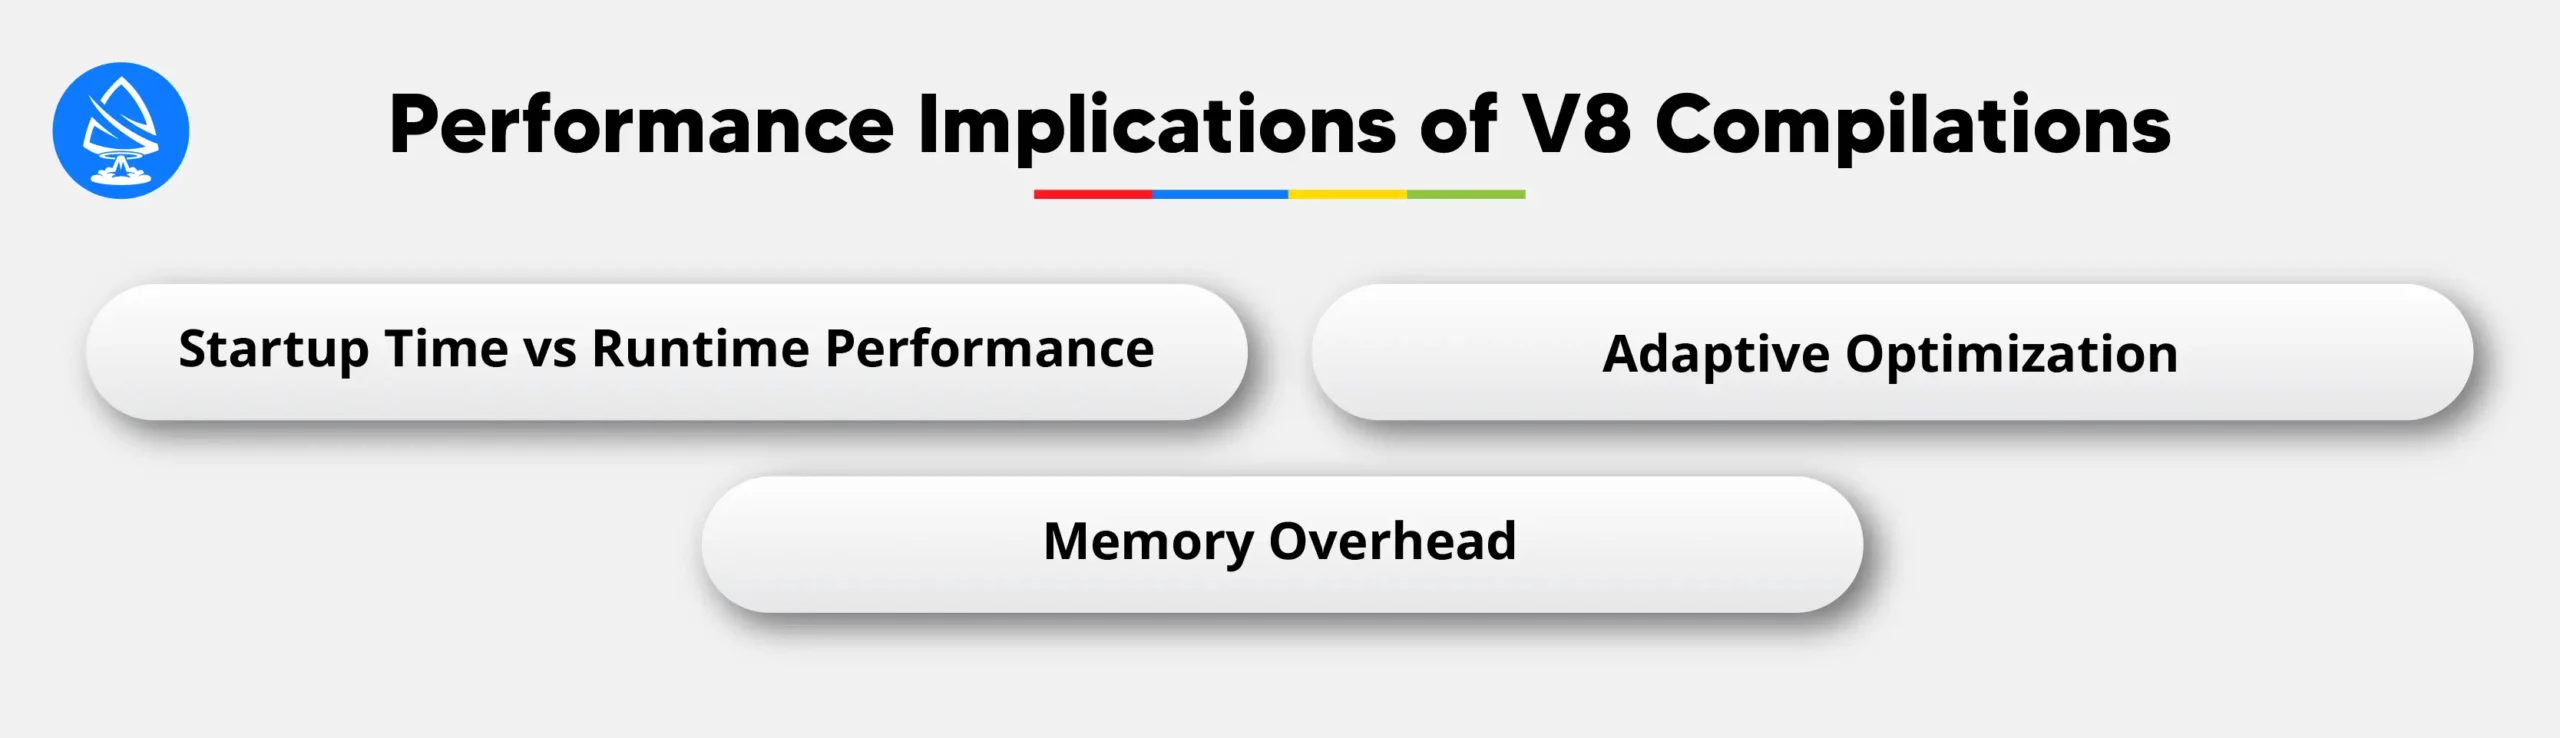 Performance Implications of V8 Compilations 